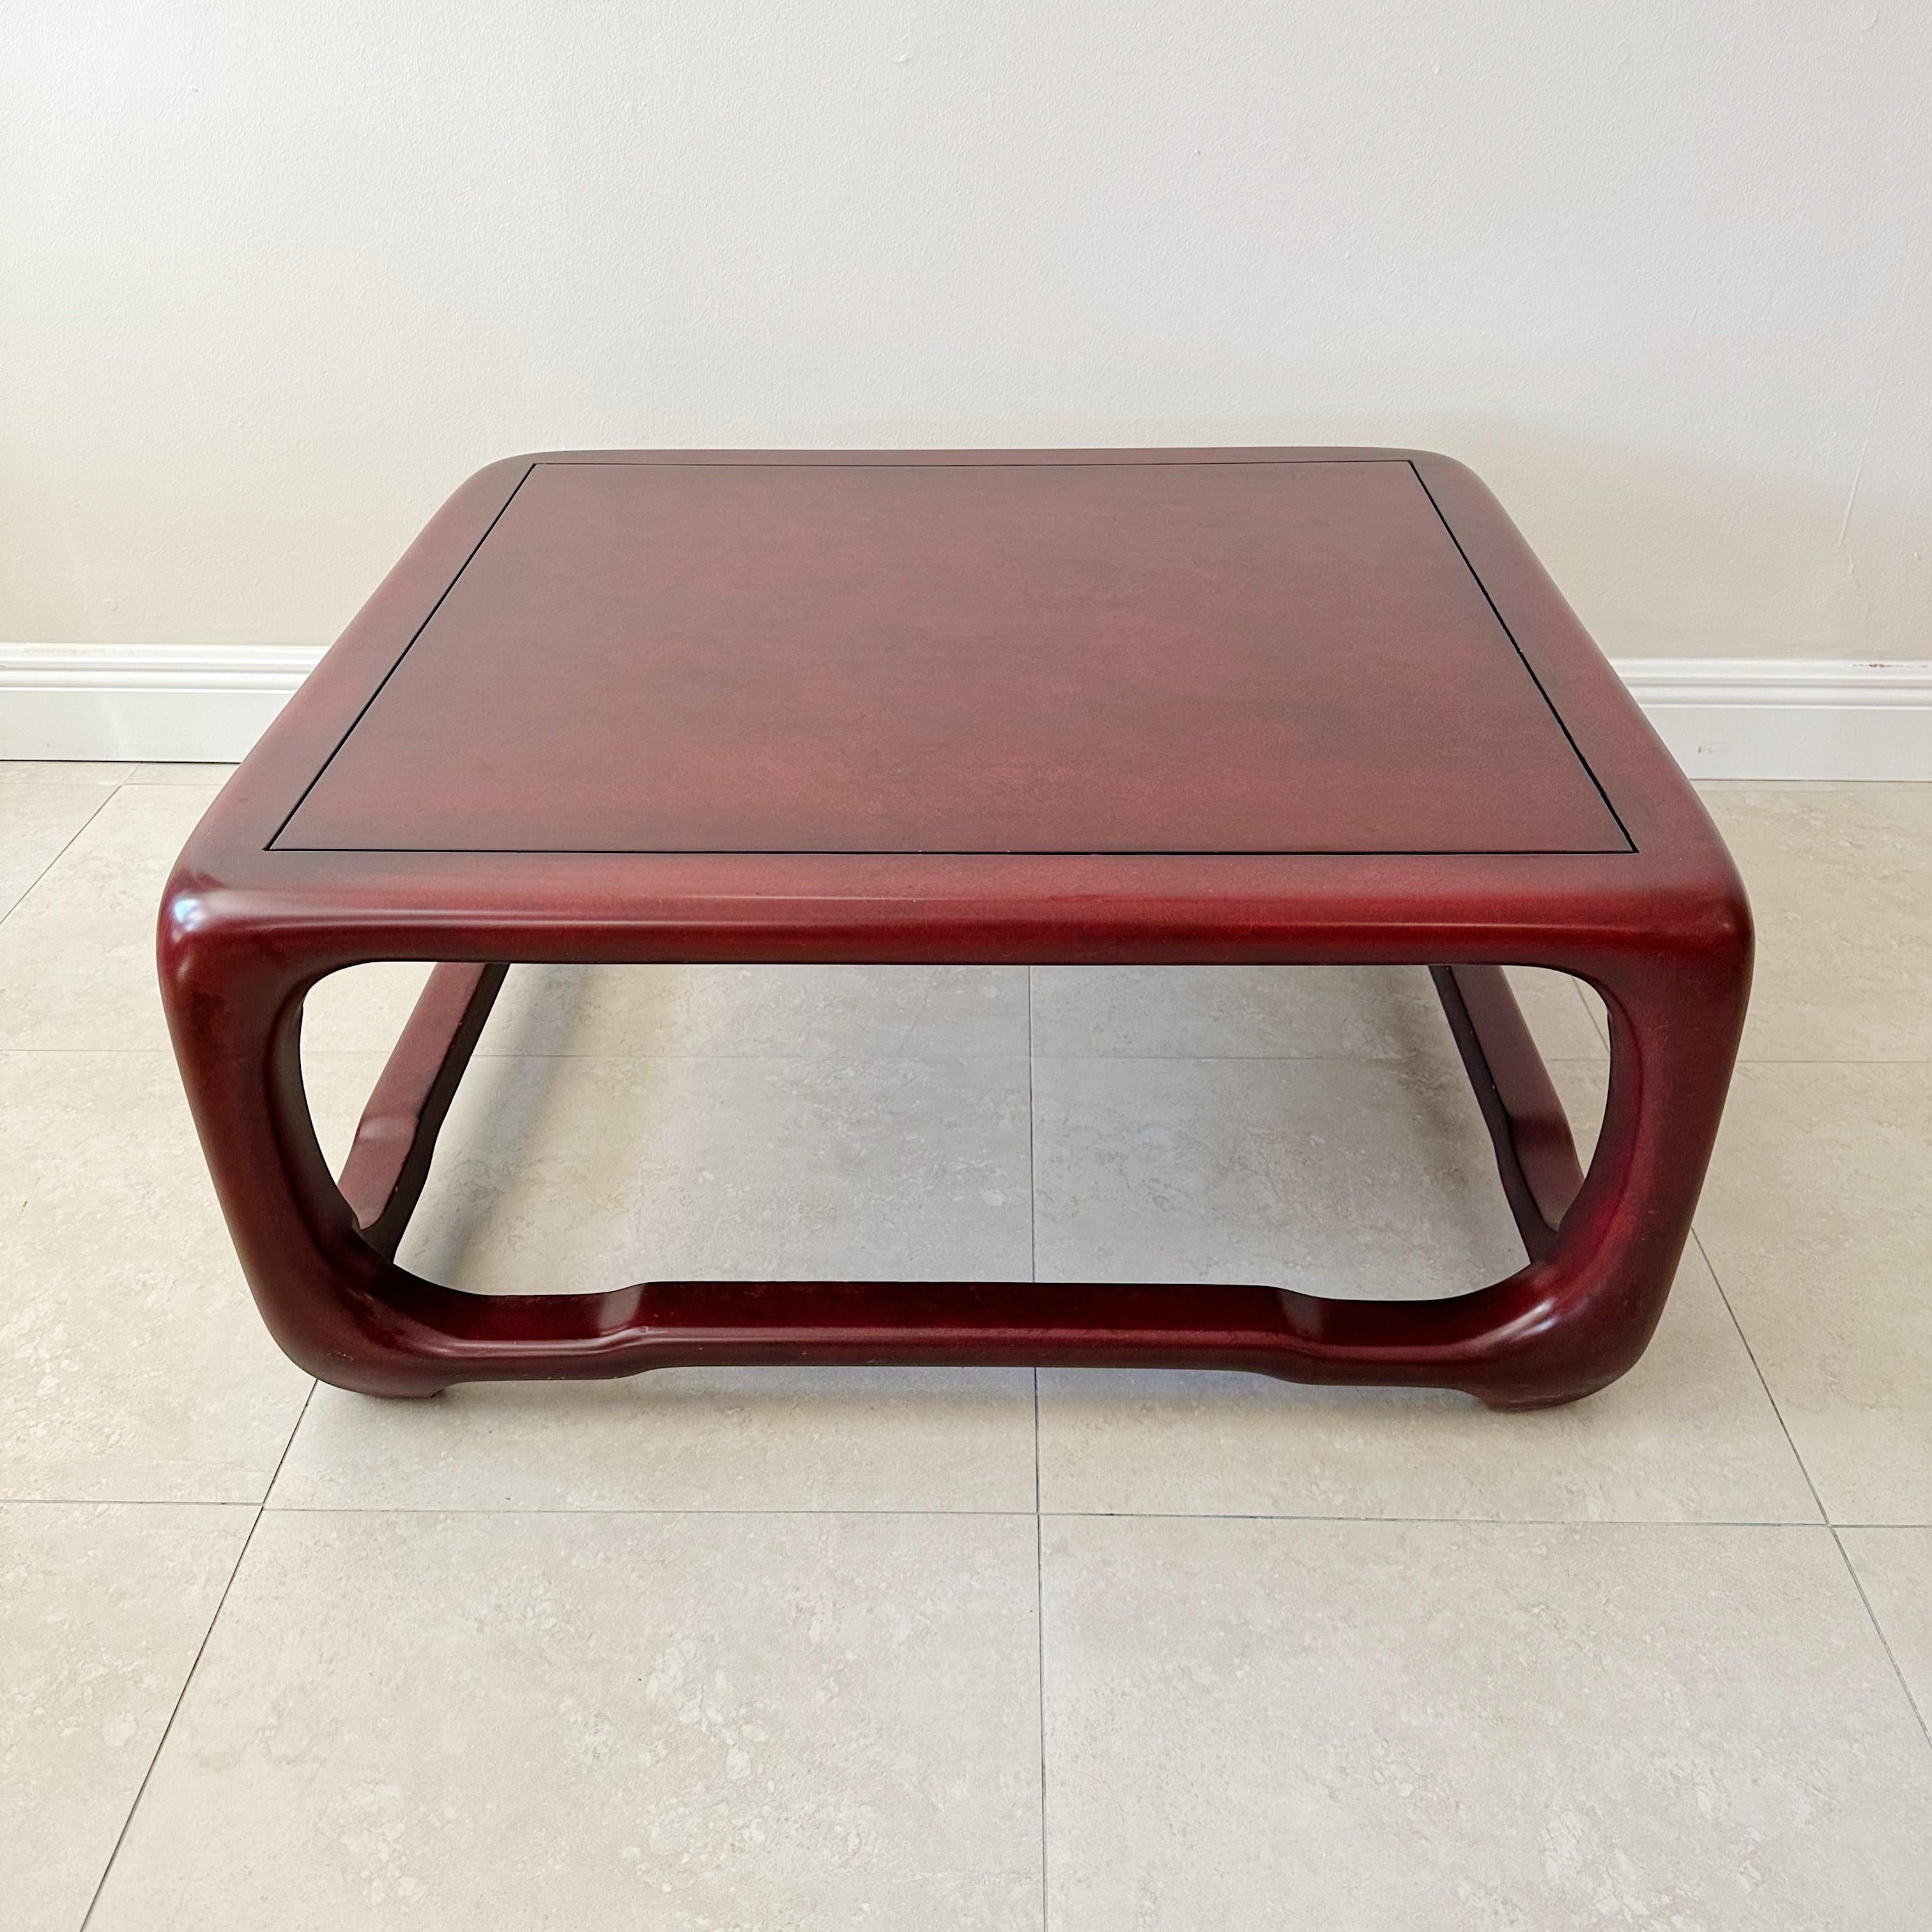 Chinese cube style coffee table by Karl Spring in Lacquered Chinese red. As seen in the Karl Springer LTD catalog 